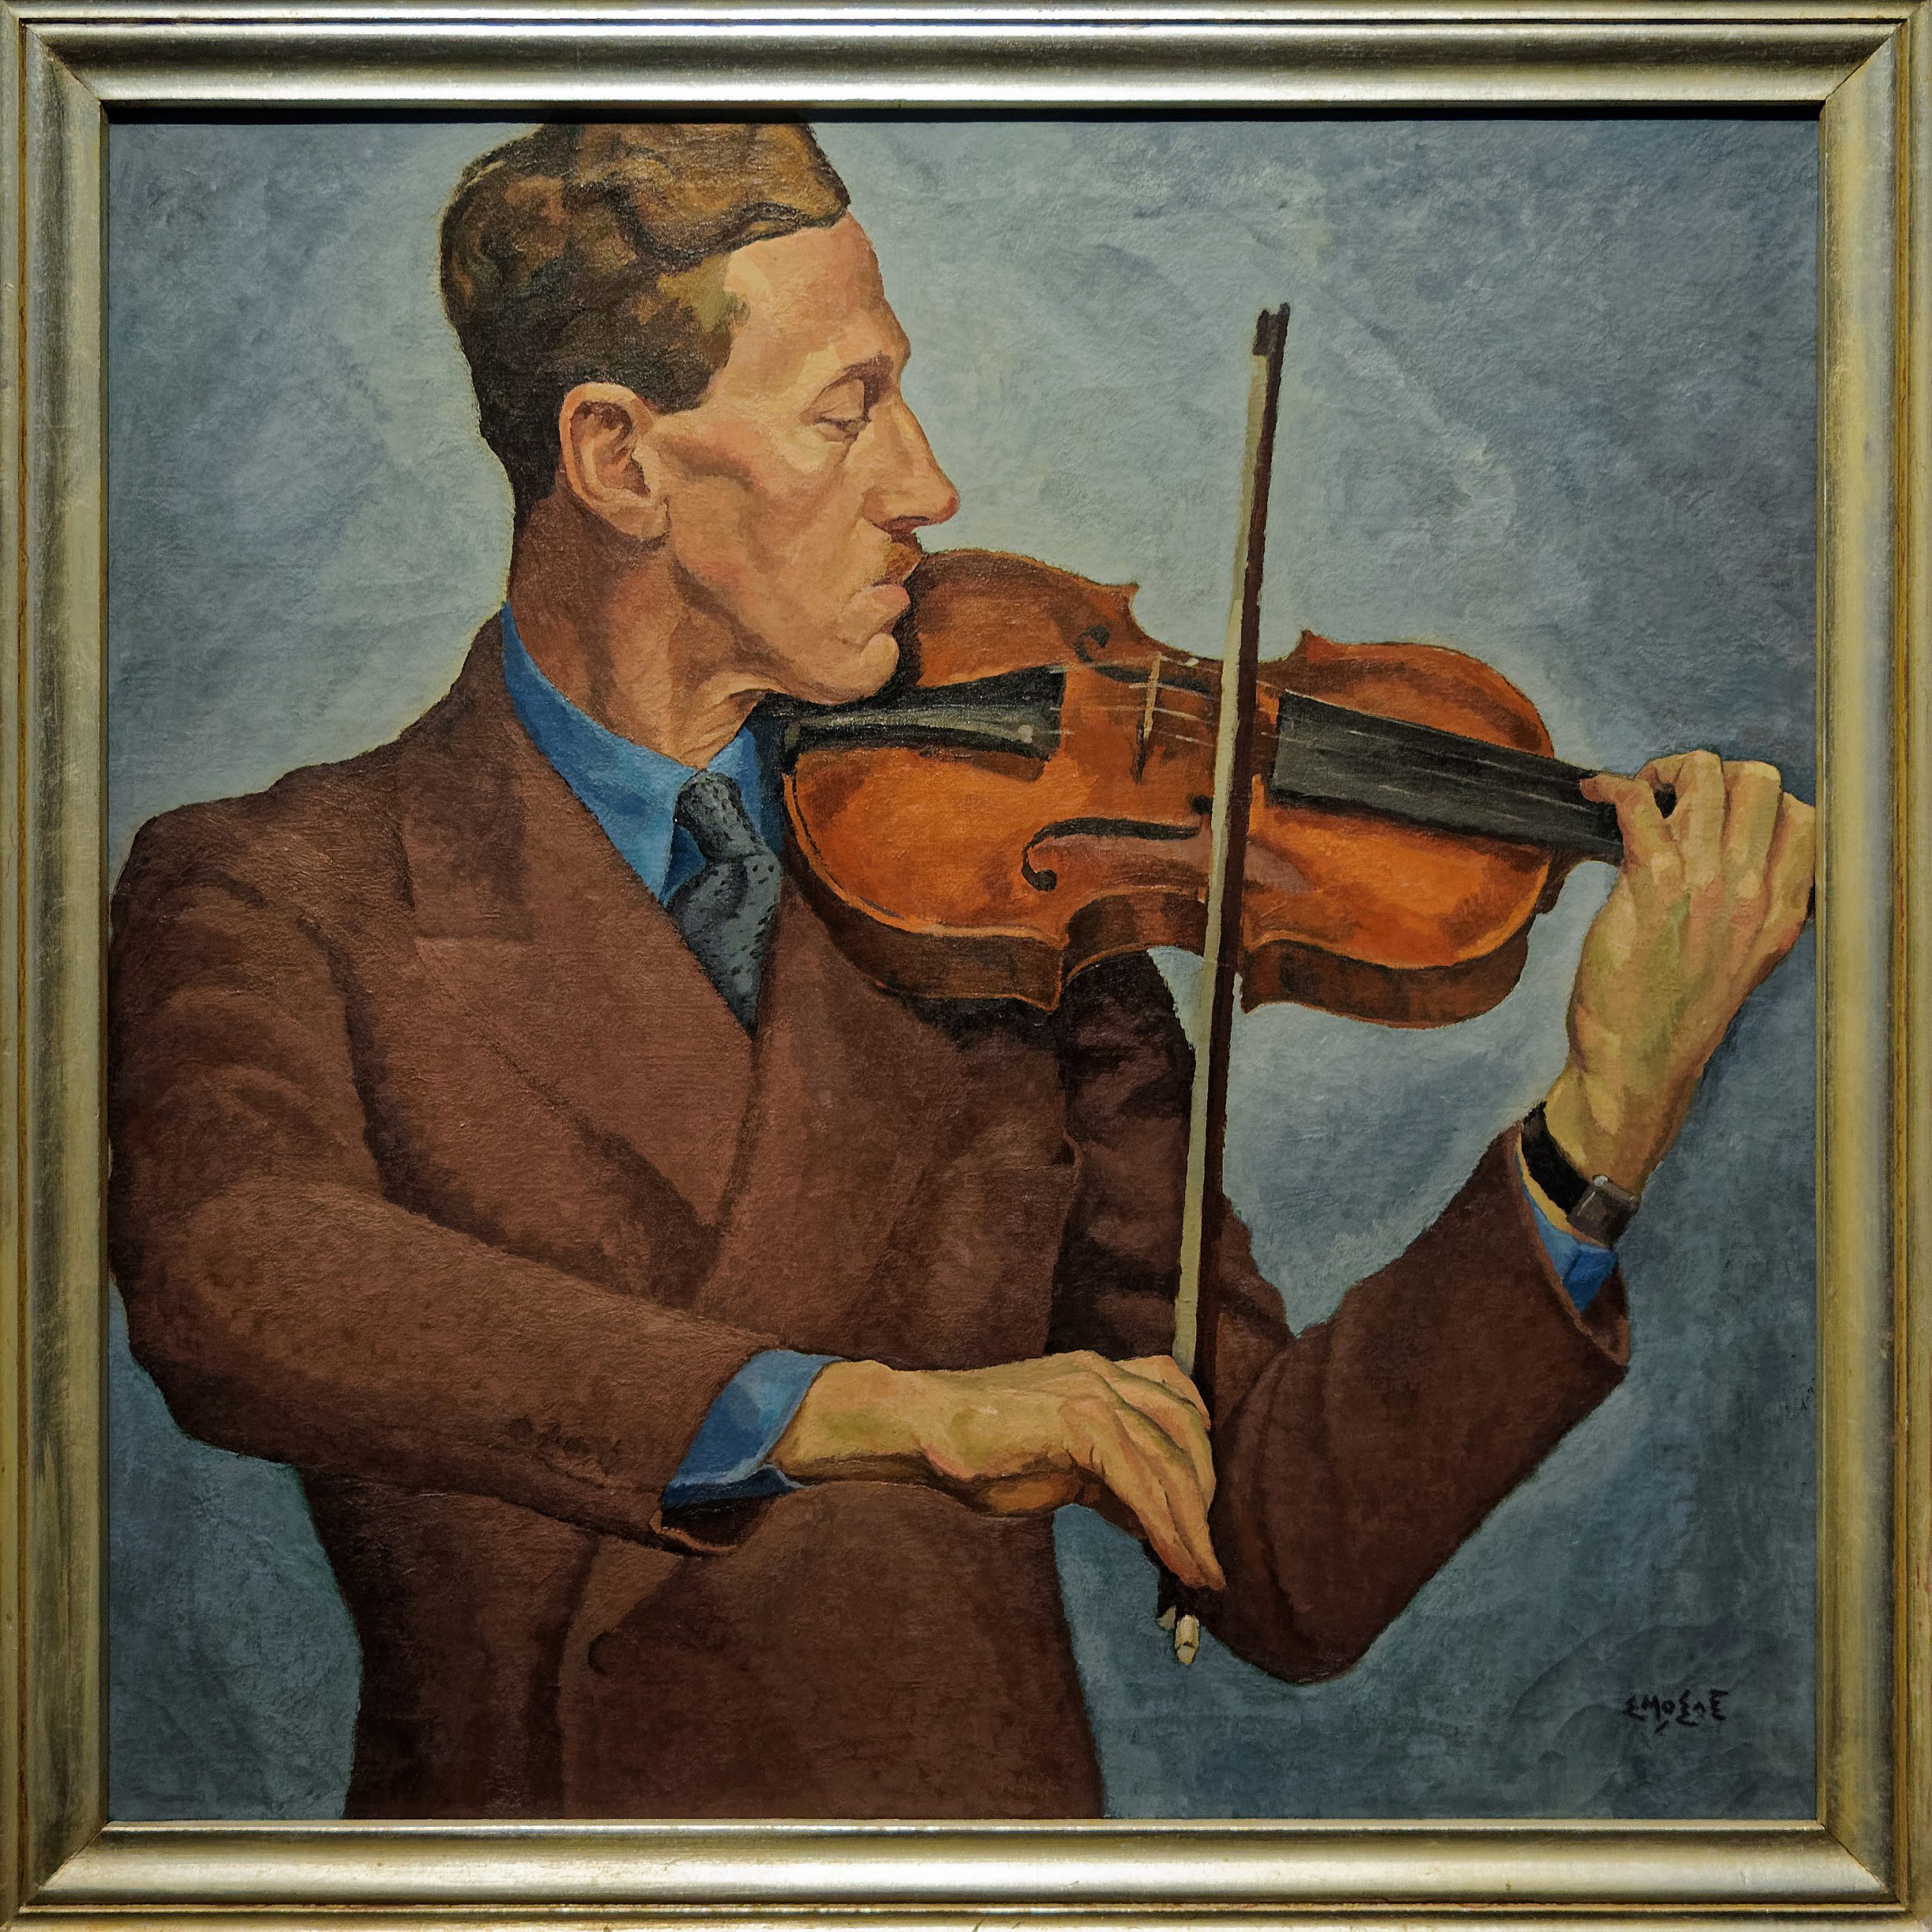 Painting of a middle-aged man from the waist up in a brown suit jacket, blue shirt, and tie, playing a violin against a blue-gray background.